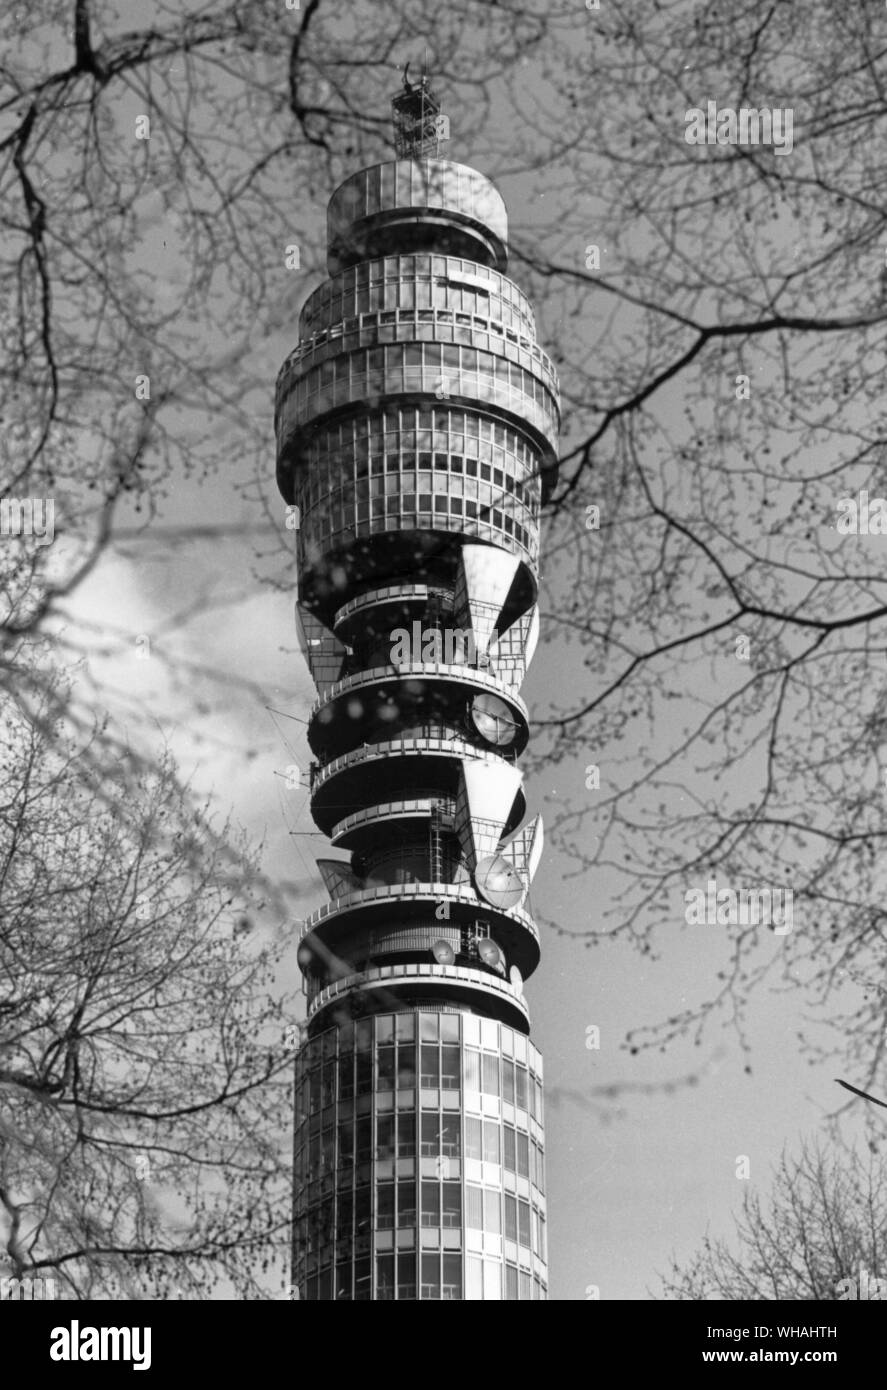 General Post Office Tower. Londres Banque D'Images